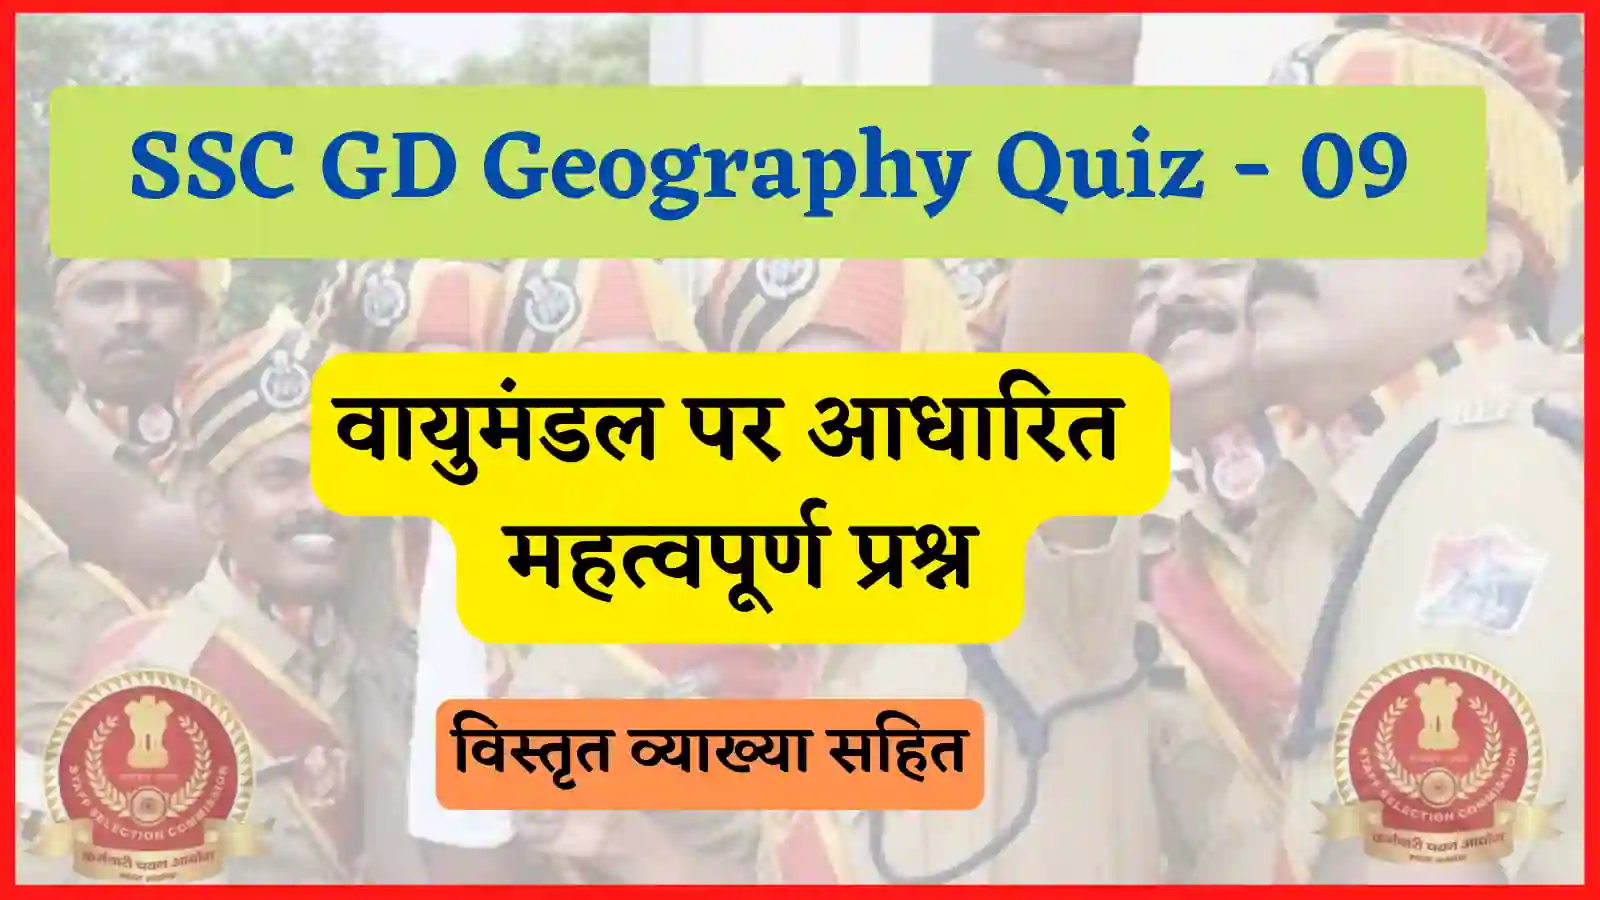    SSC GD Geography Quiz - 09   